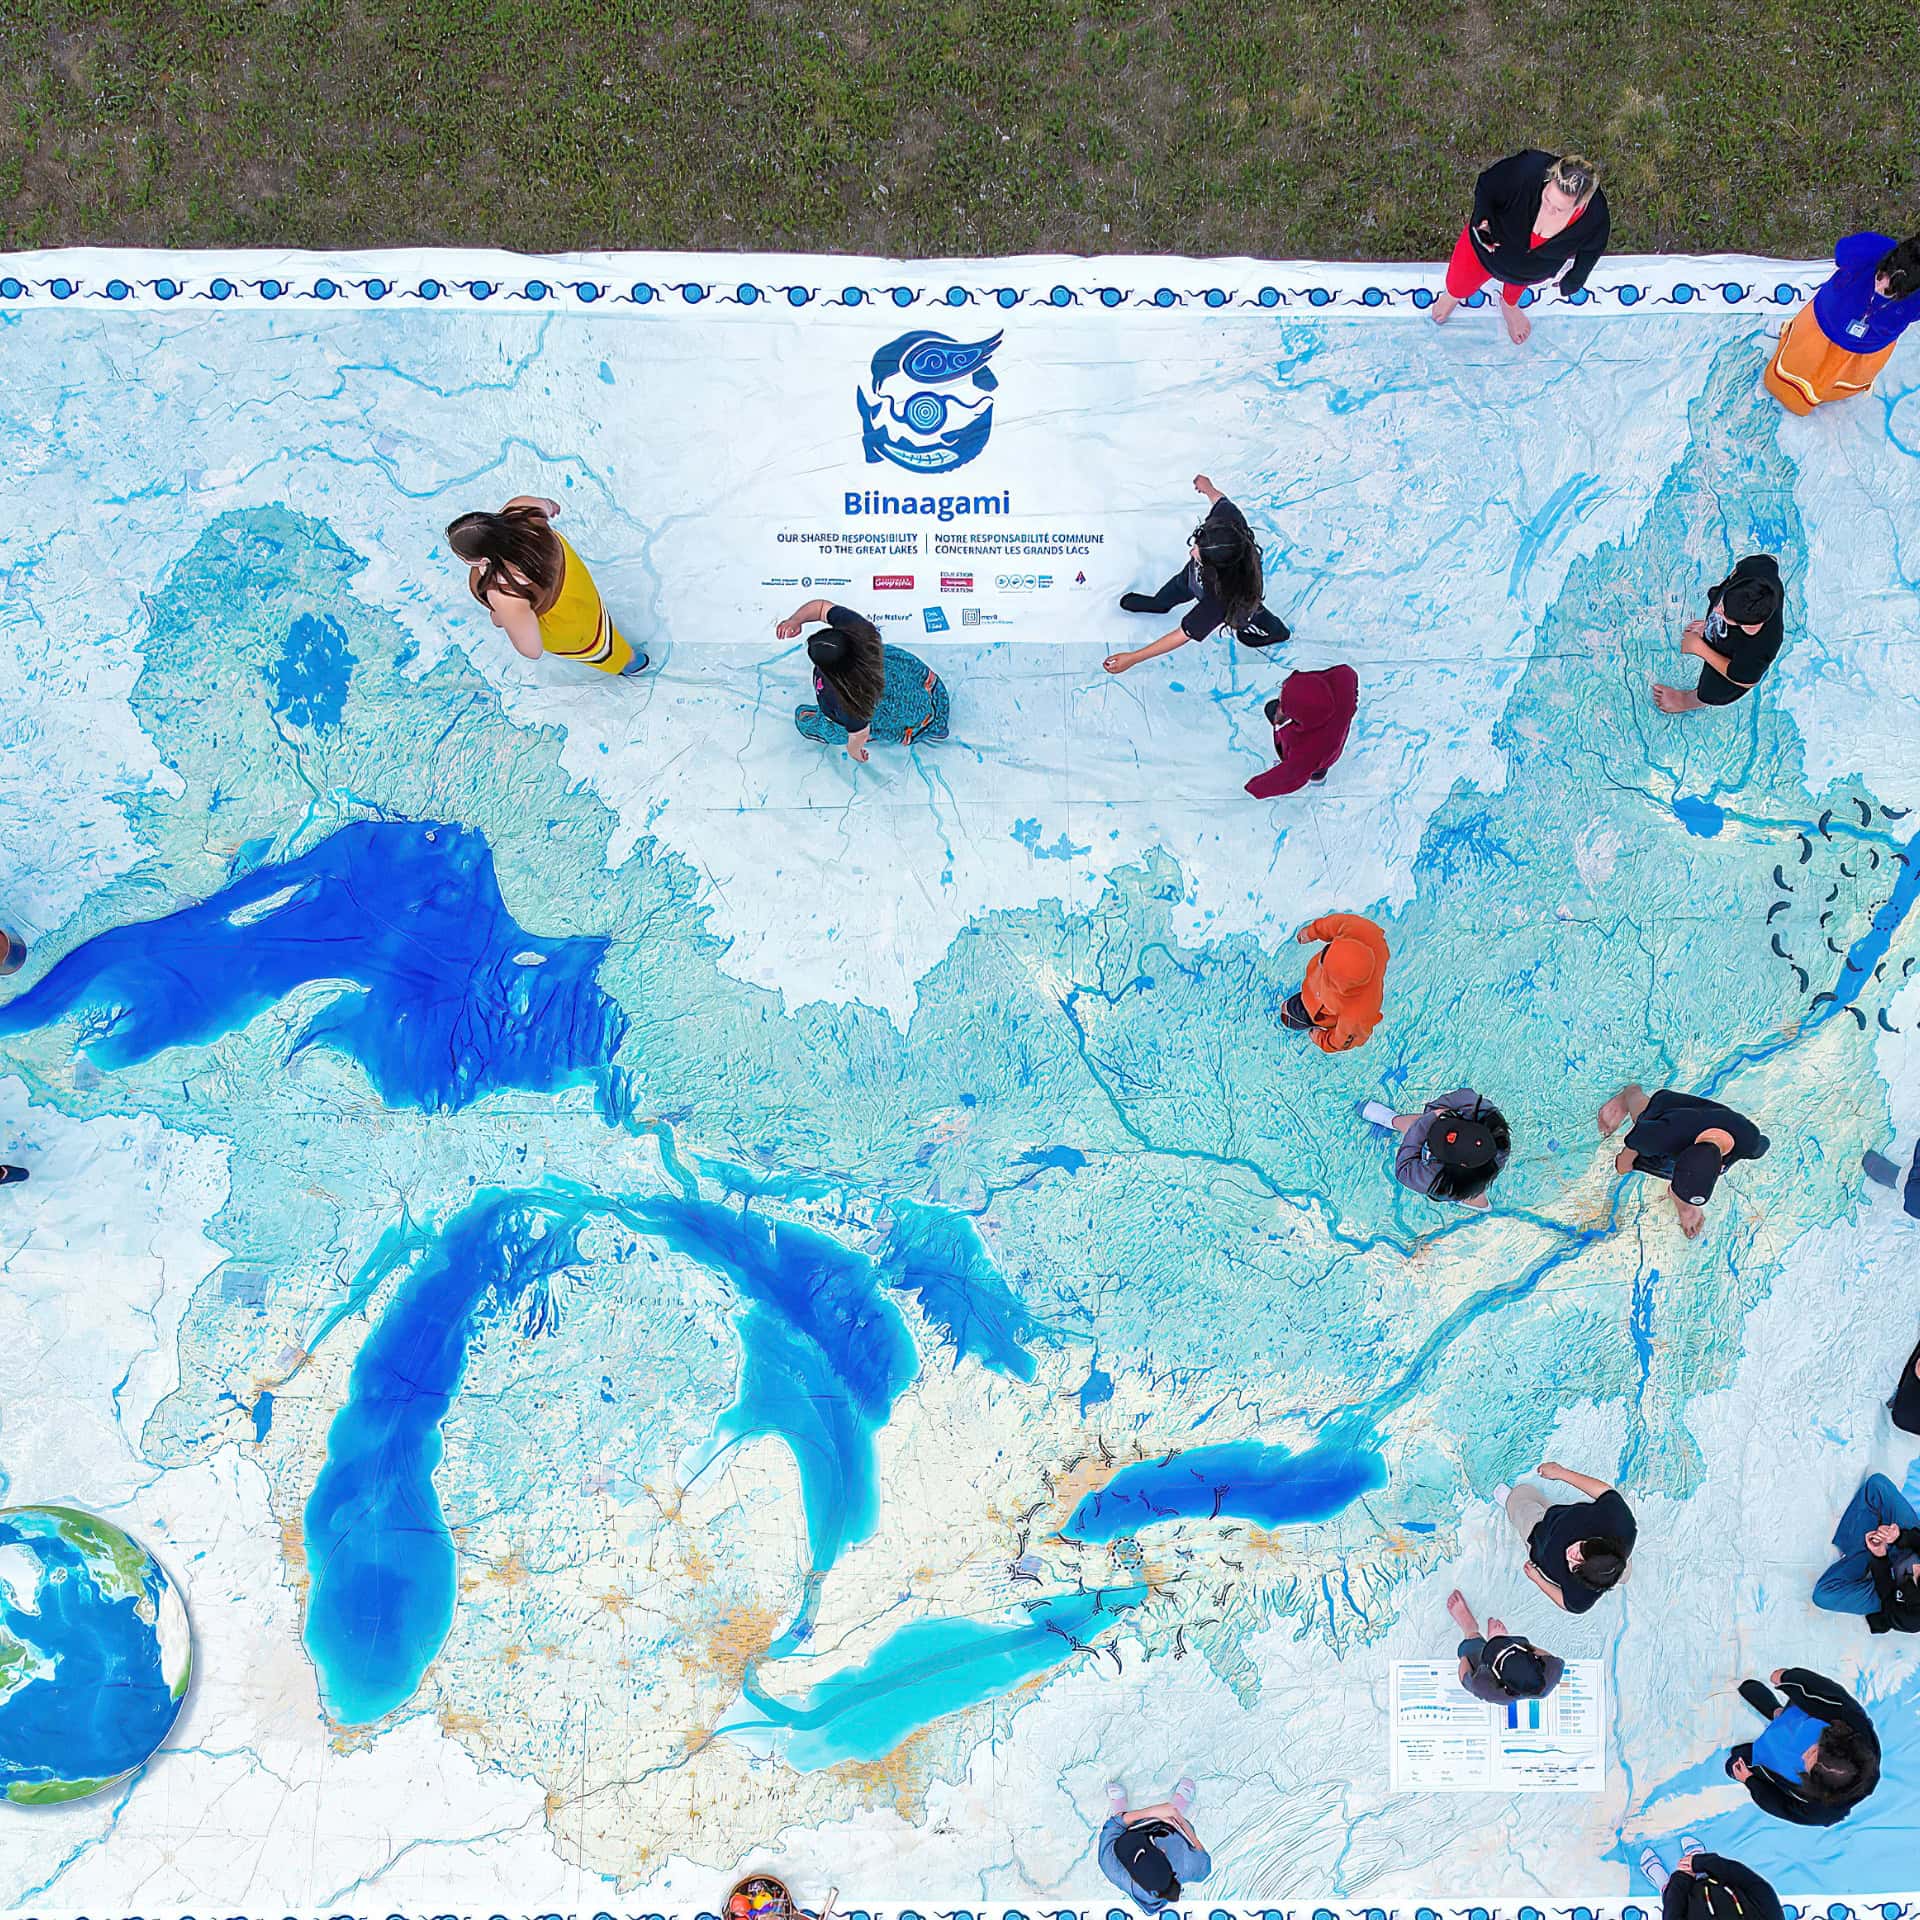 An overhead shot looking down at people walking over a large map of the Great Lakes covering the floor. The Biinaagami logo is displayed at the top of the map.